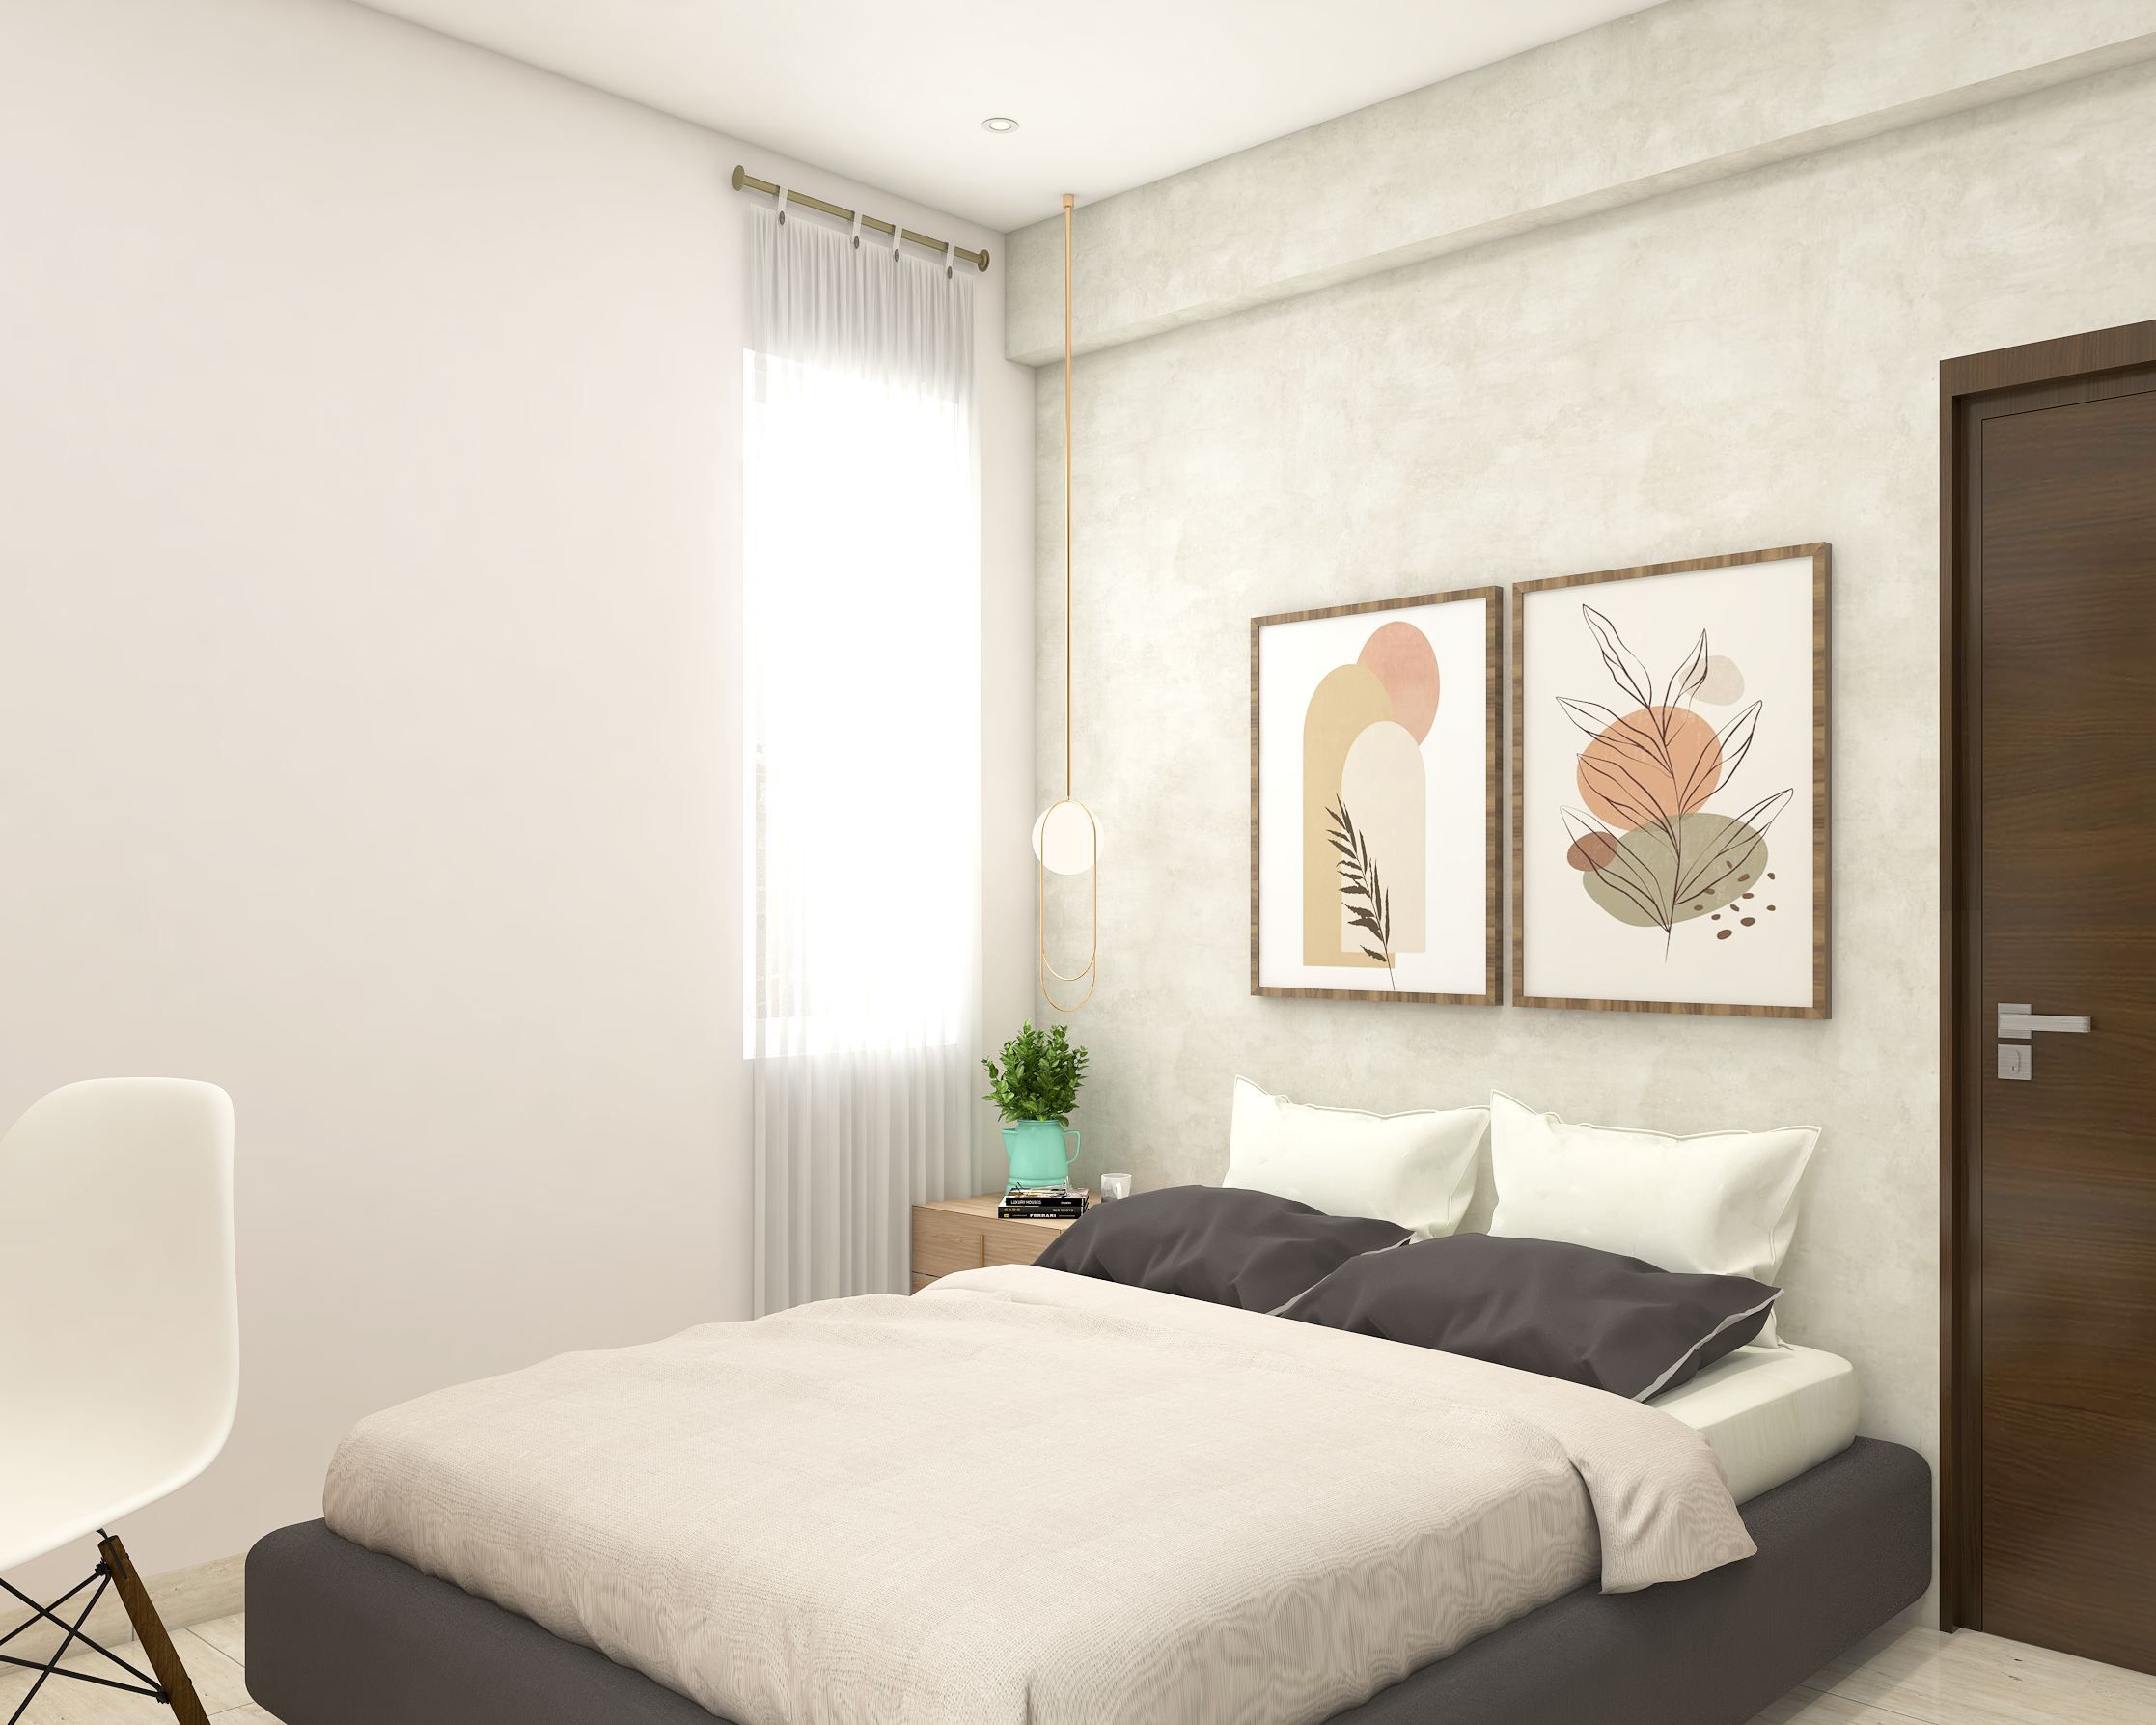 Minimalistic Master Bedroom Design With Textured Wall